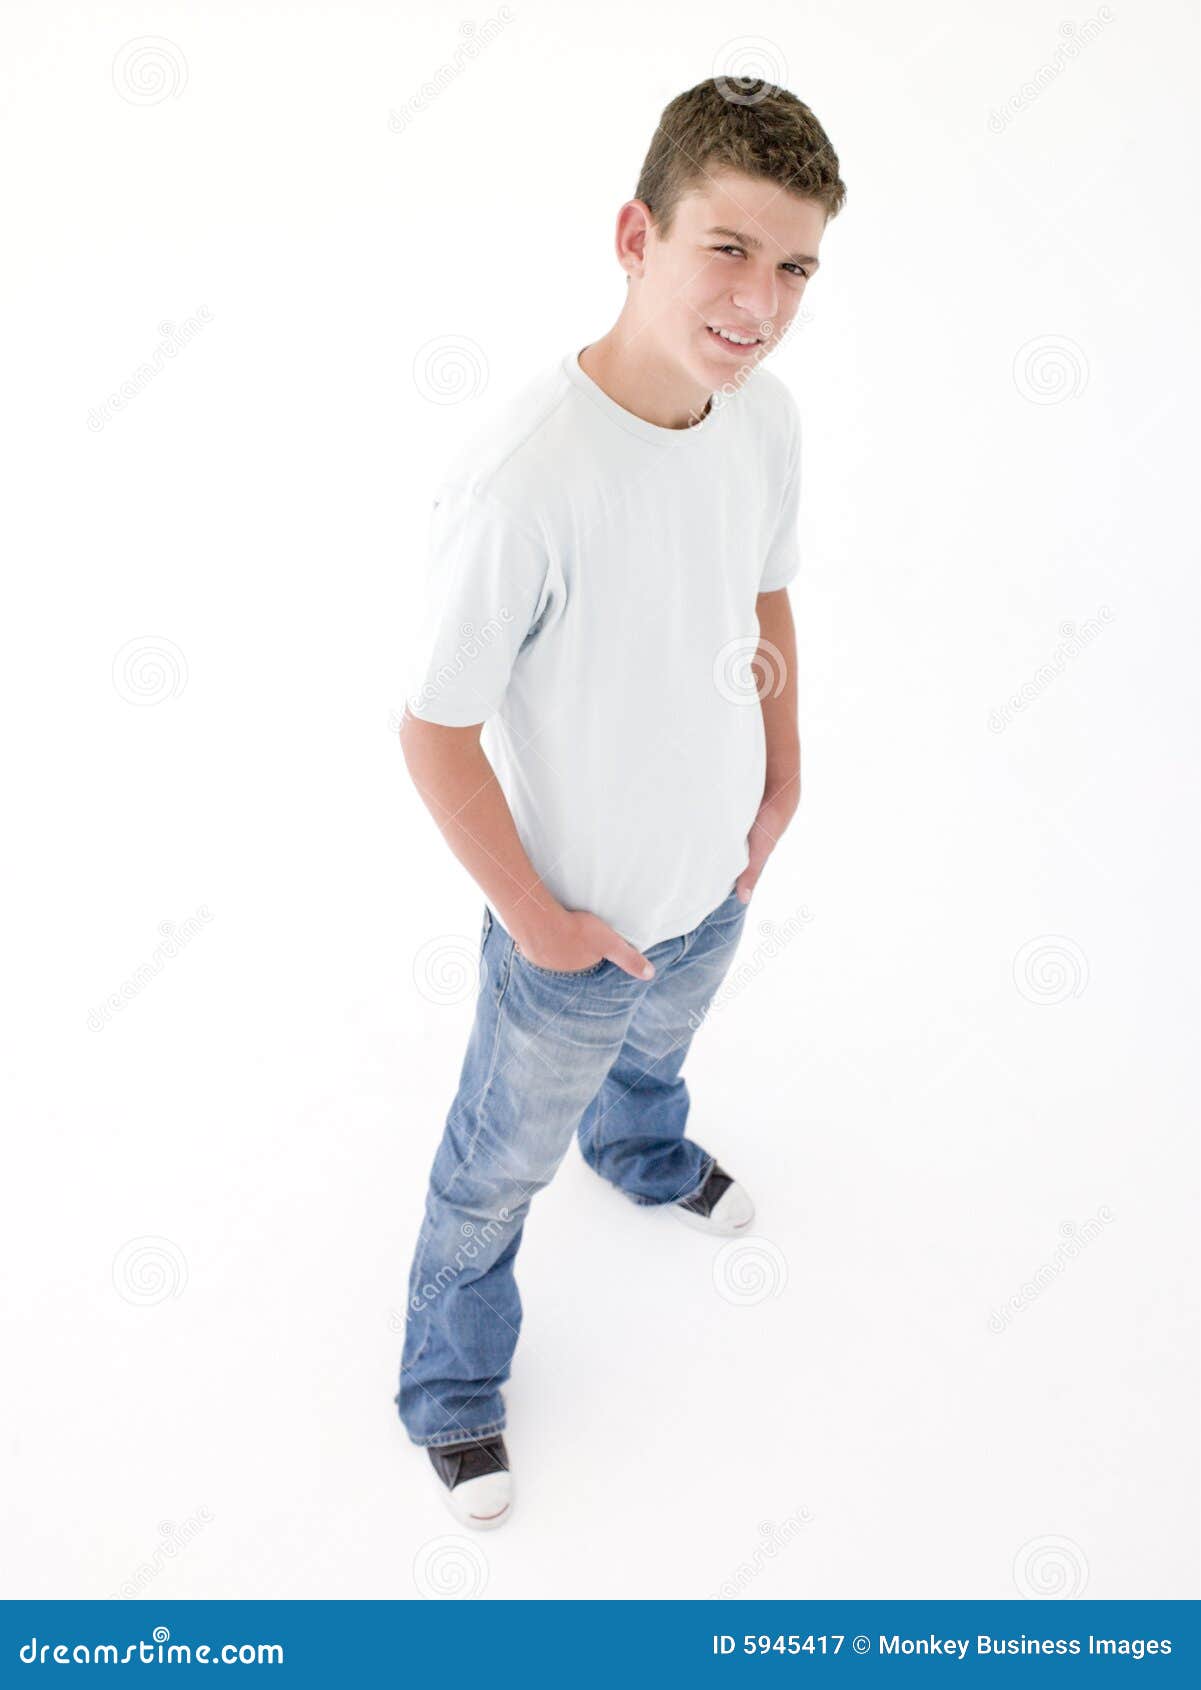 Teenage boy standing with hands in pockets — Stock Photo 